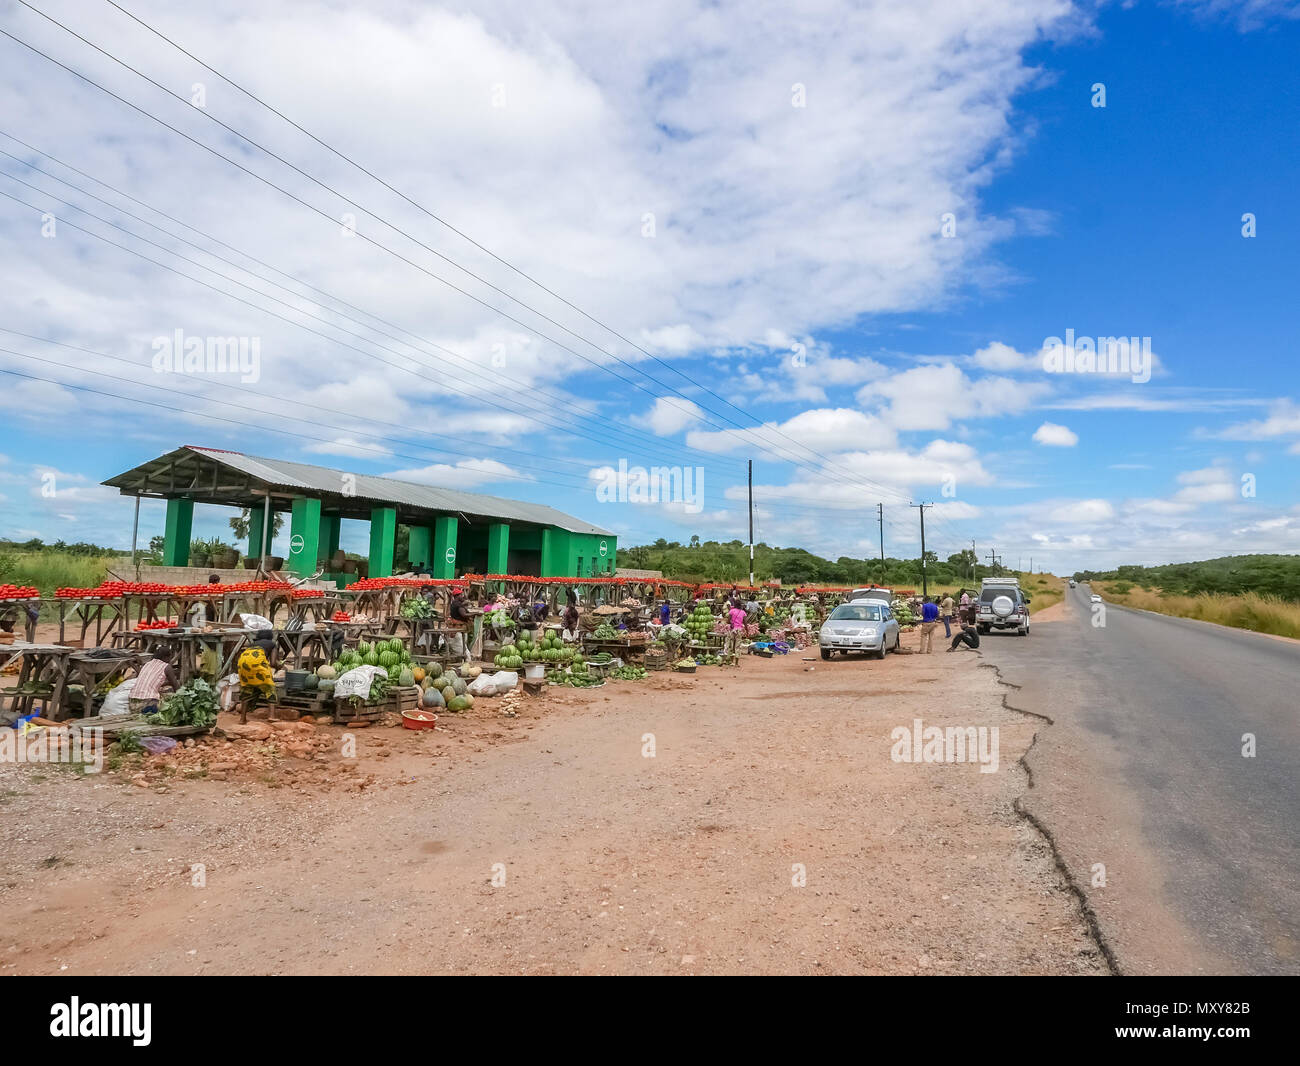 Lusaka, Zambia - April 3, 2015: People stopping at the local market place just at the road before Lusaka Stock Photo